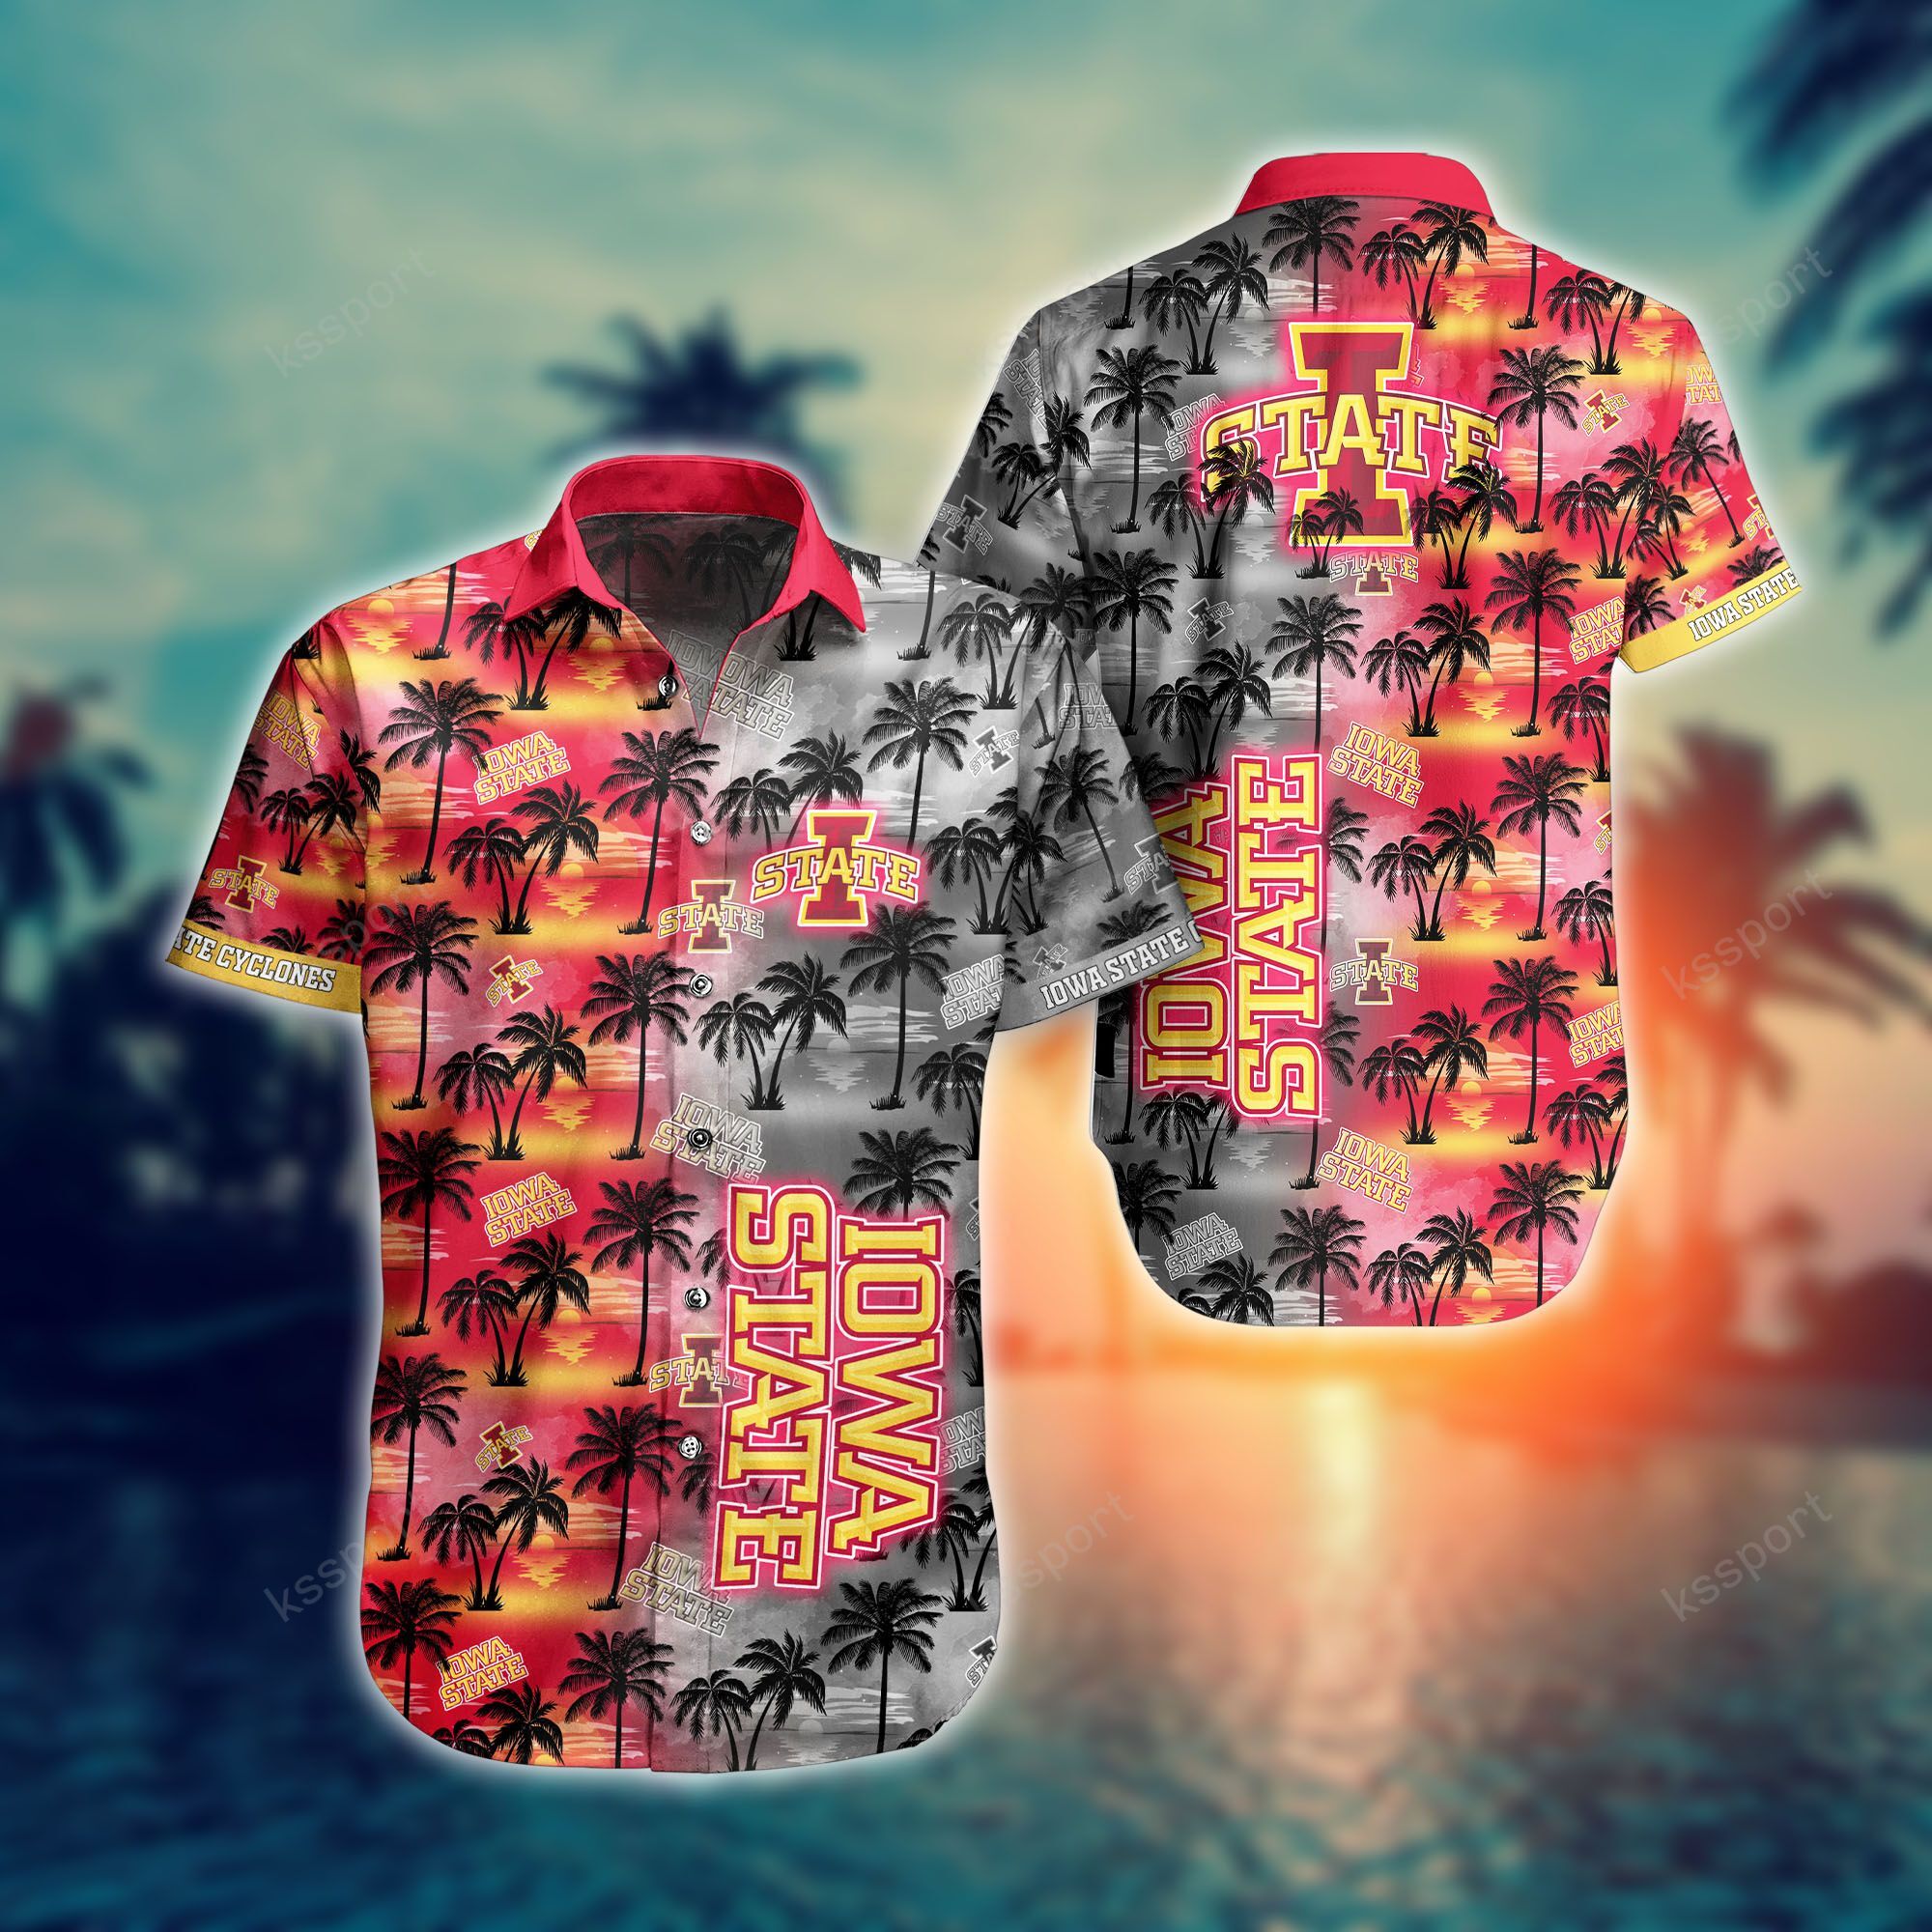 Treat yourself to a cool Hawaiian set today! 27